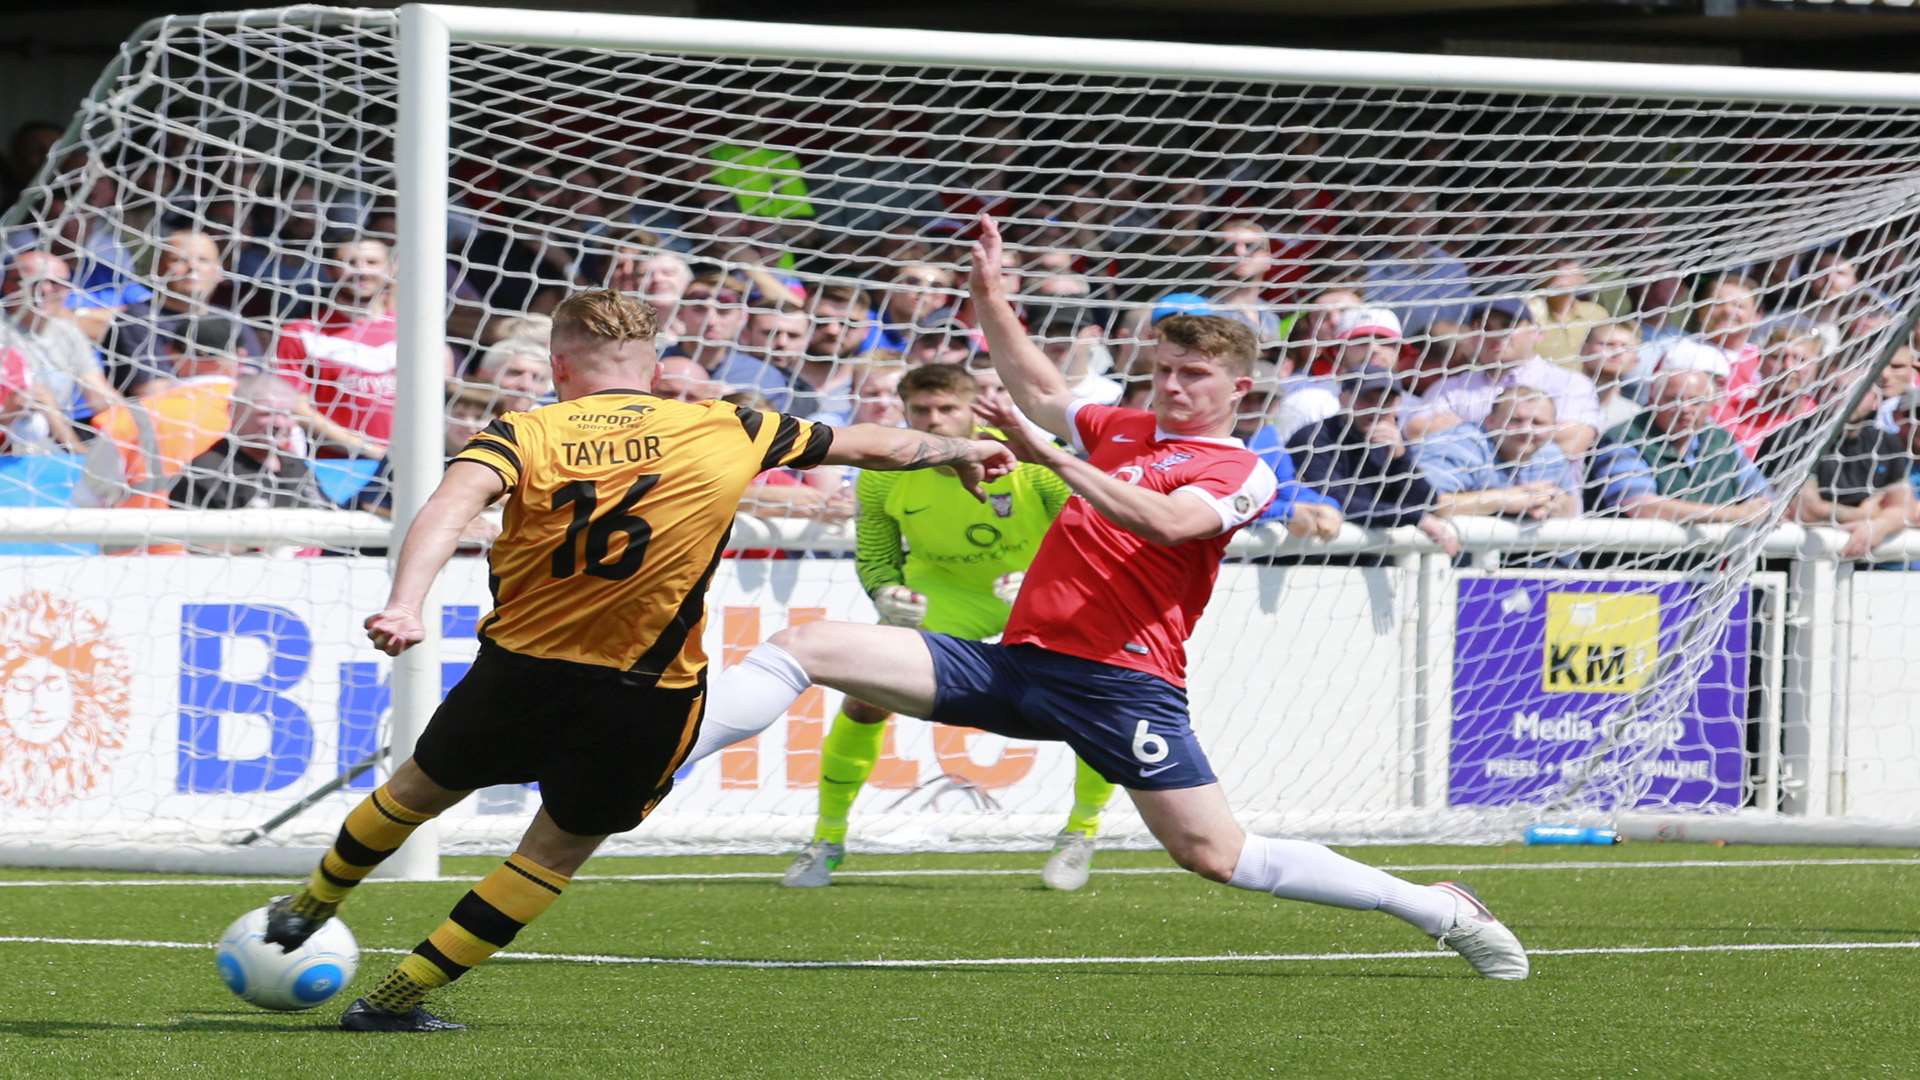 Bobby-Joe Taylor gives Maidstone the lead against York on the opening day Picture: Martin Apps